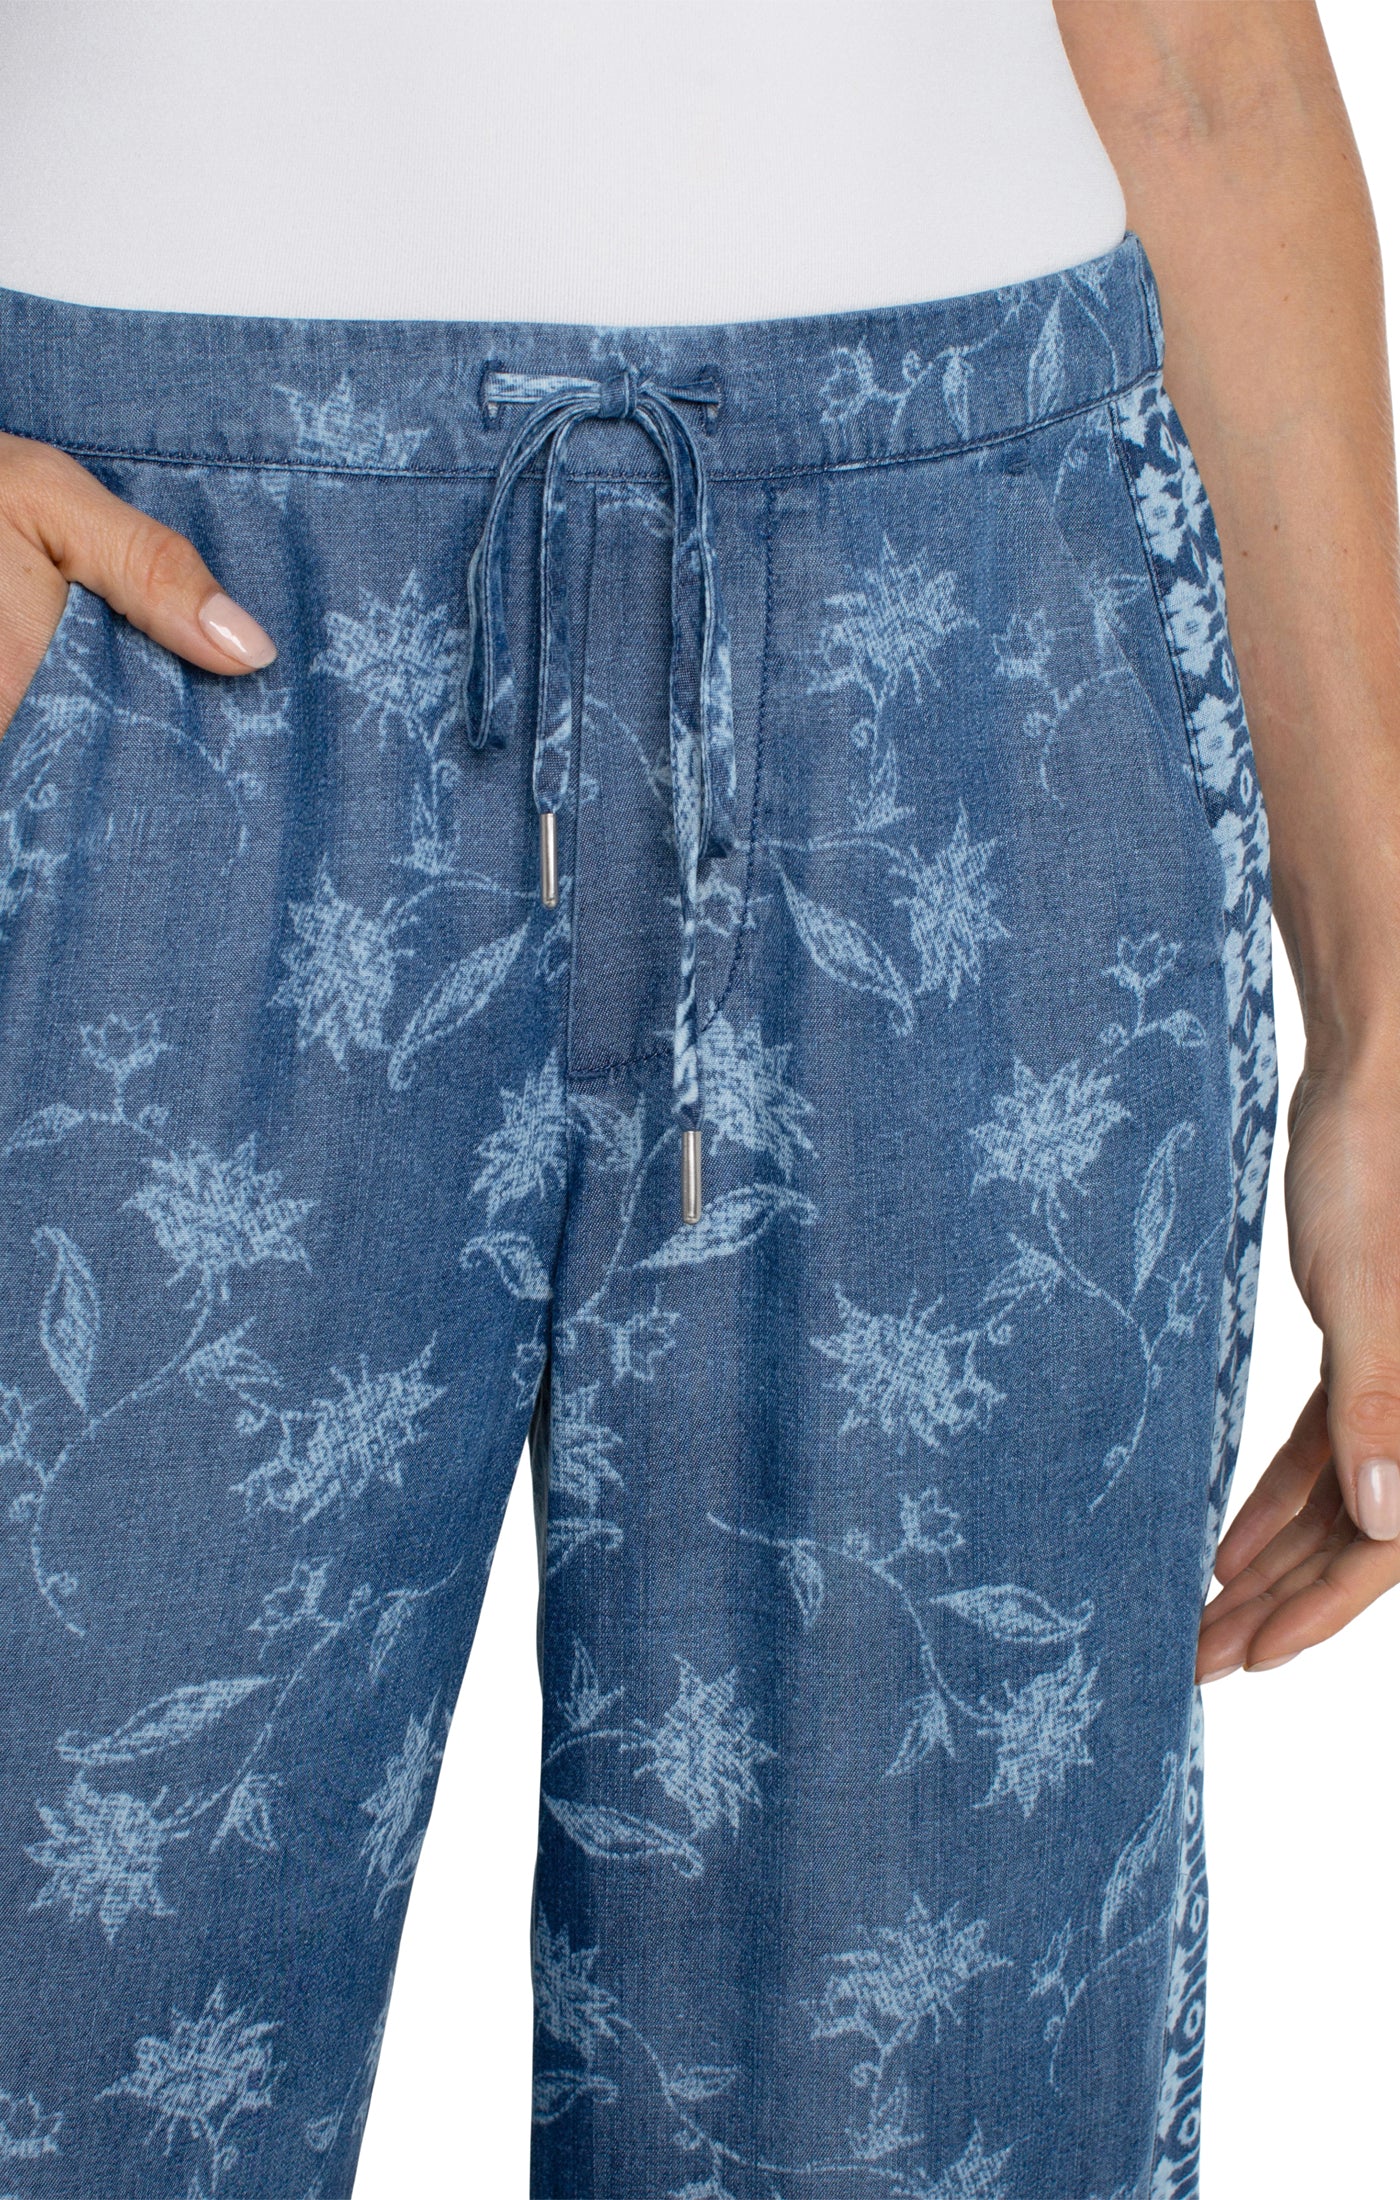 LVP Pull On Wide Leg Crop Trouser - Indigo Floral Close Up View